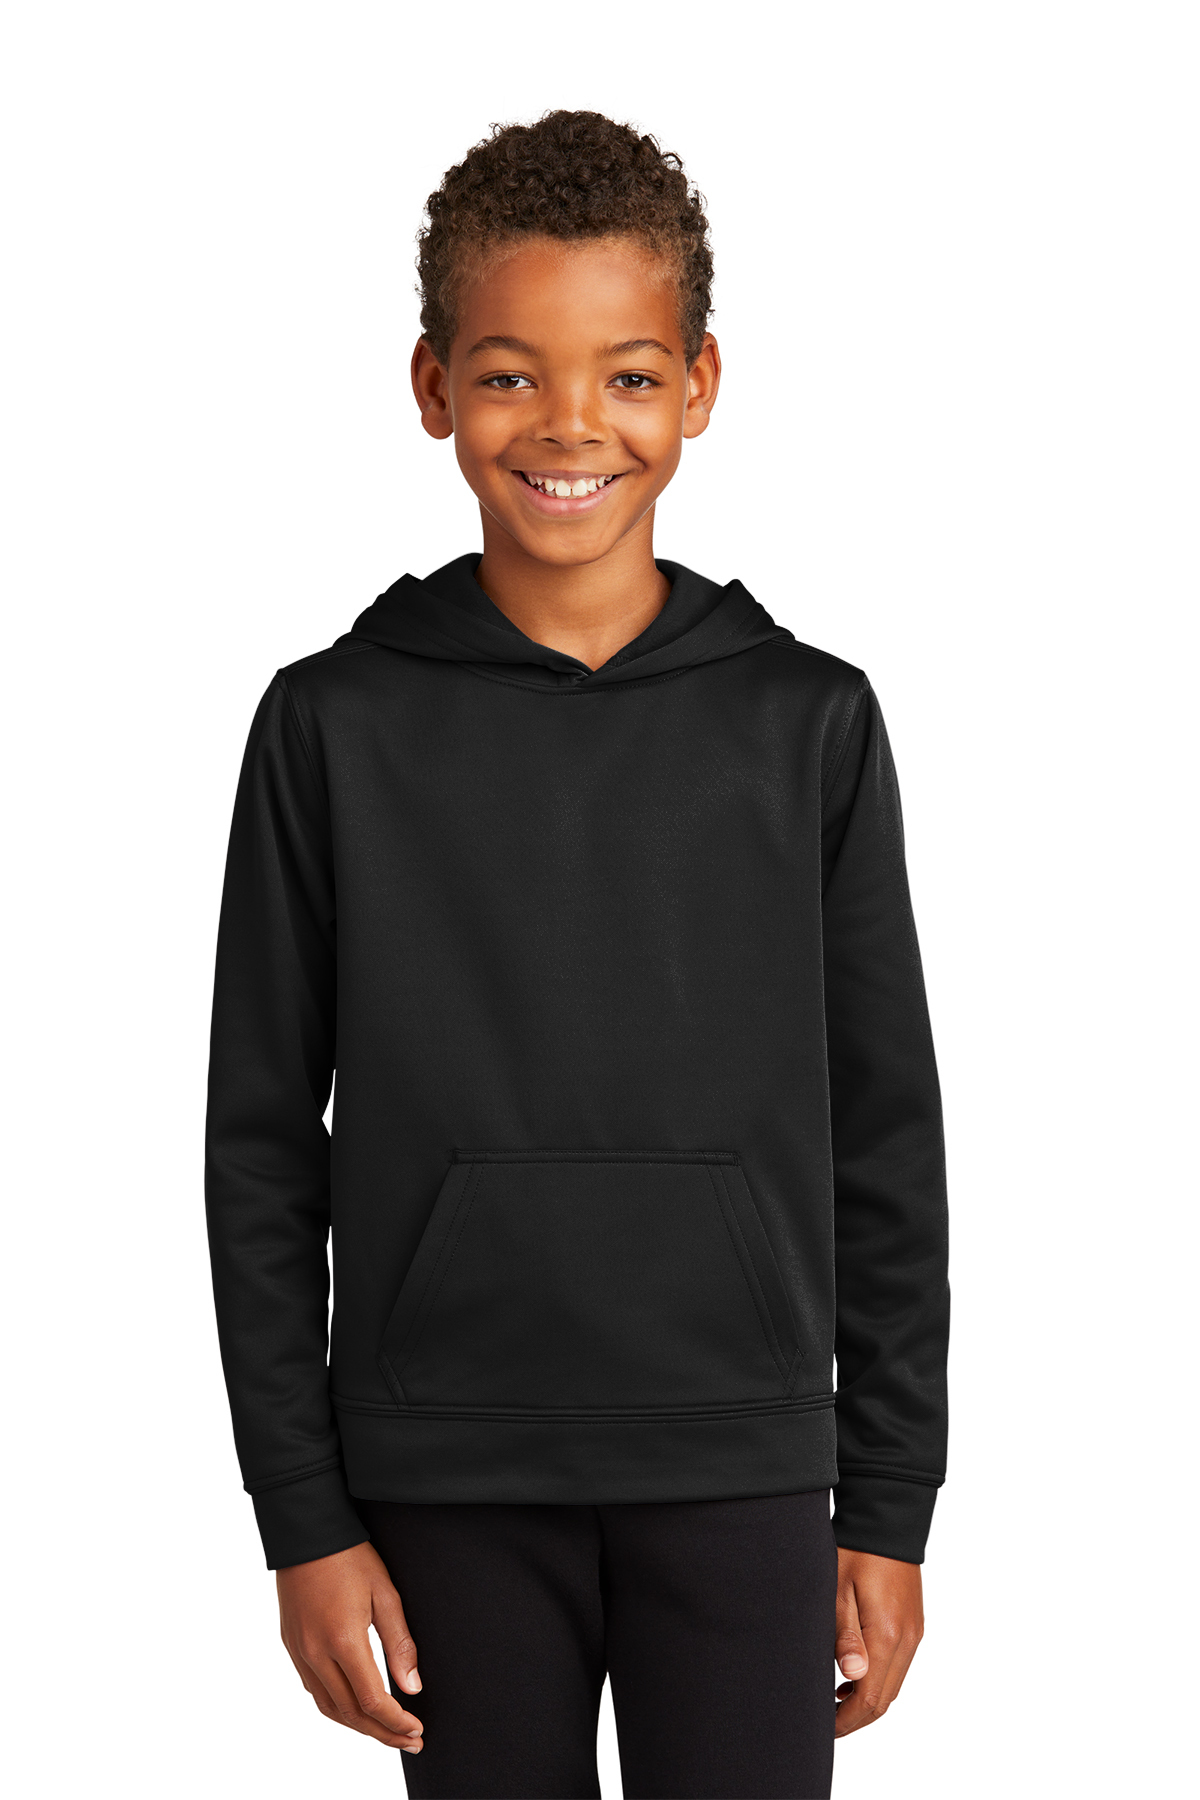 Port & Company ® Youth Performance Fleece Pullover Hooded